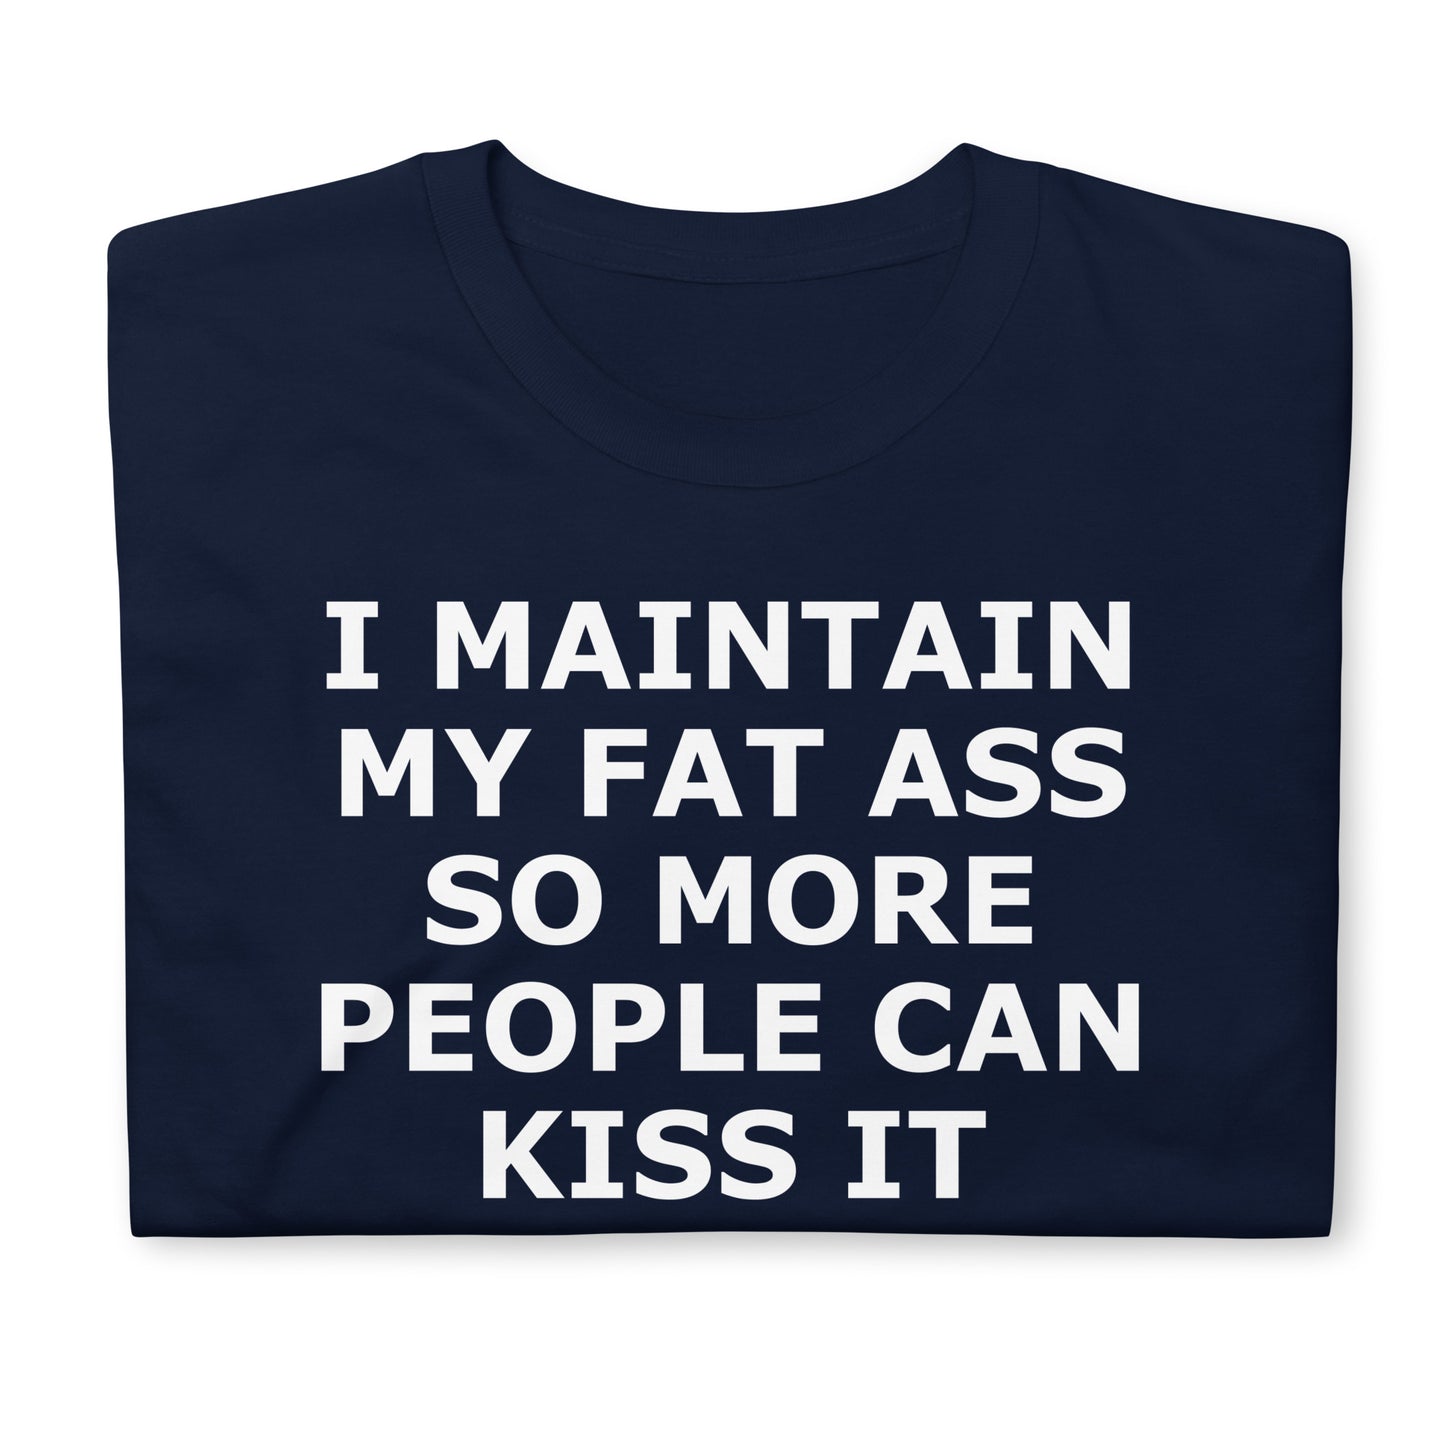 I MAINTAIN MY FAT ASS SO MORE PEOPLE CAN KISS IT Short-Sleeve Unisex T-Shirt